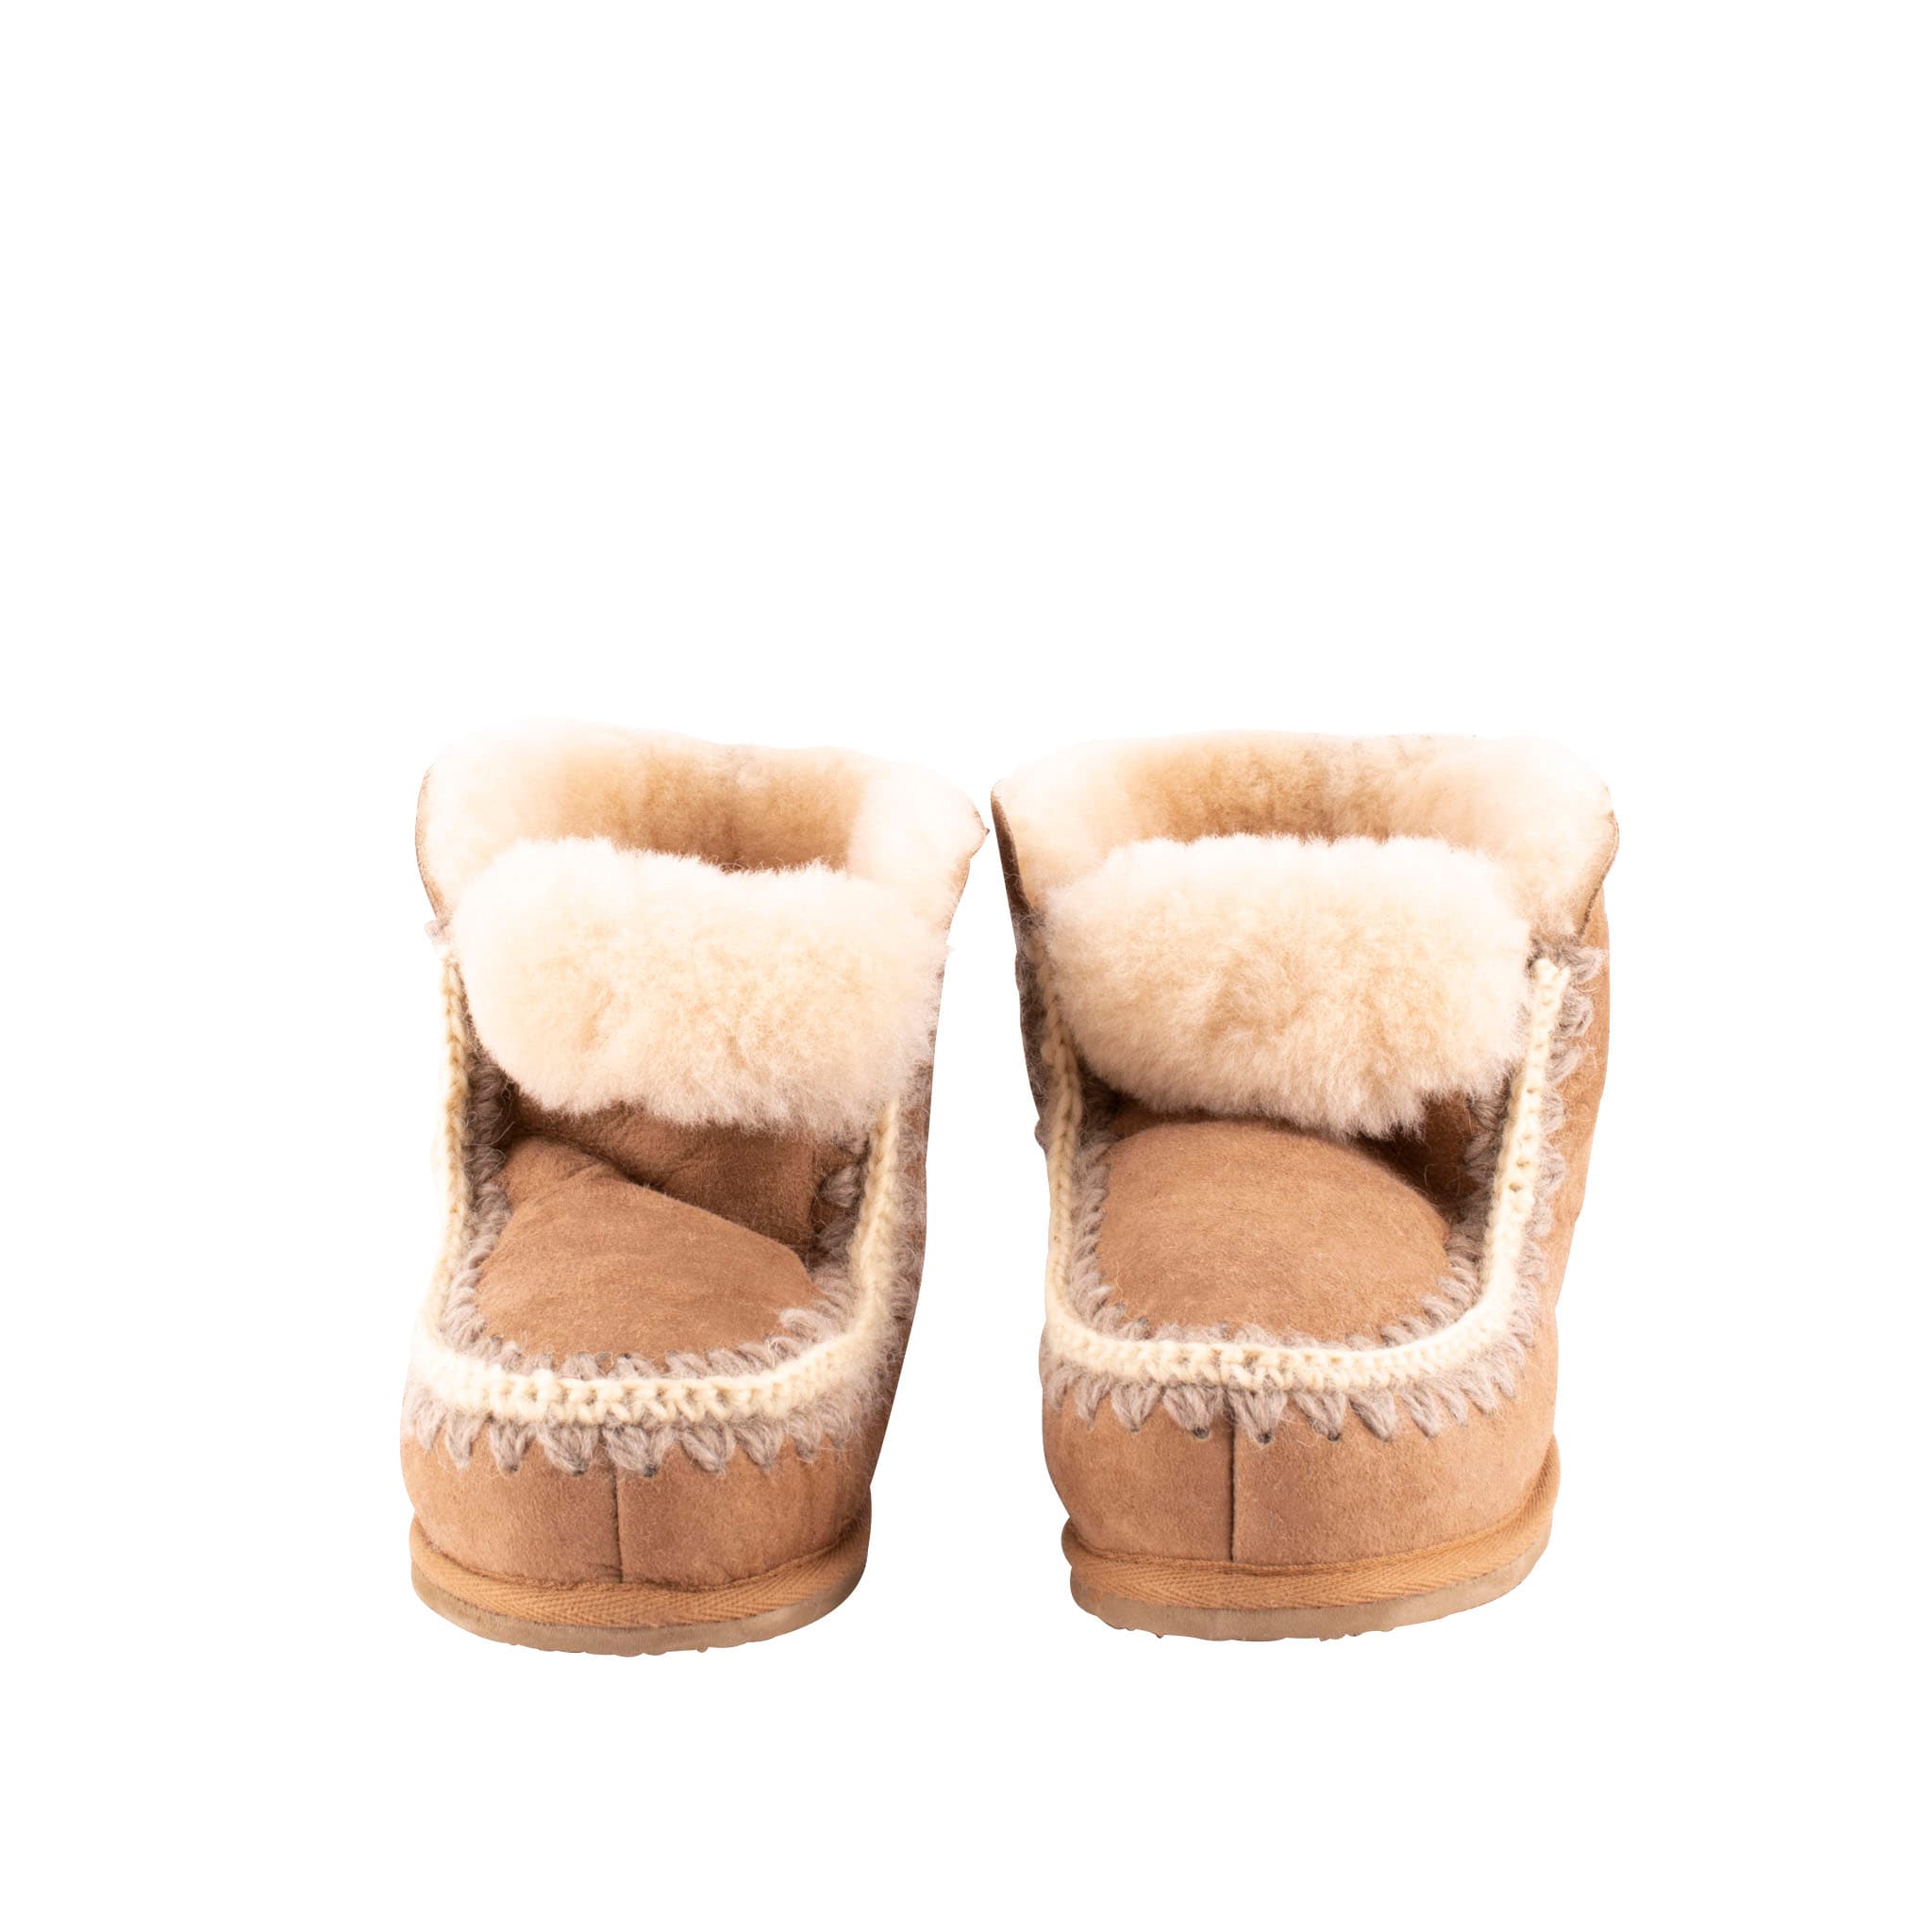 Shepherd Pia are a pair of soft pliable sheepskin slippers which are a slightly higher ankel model.